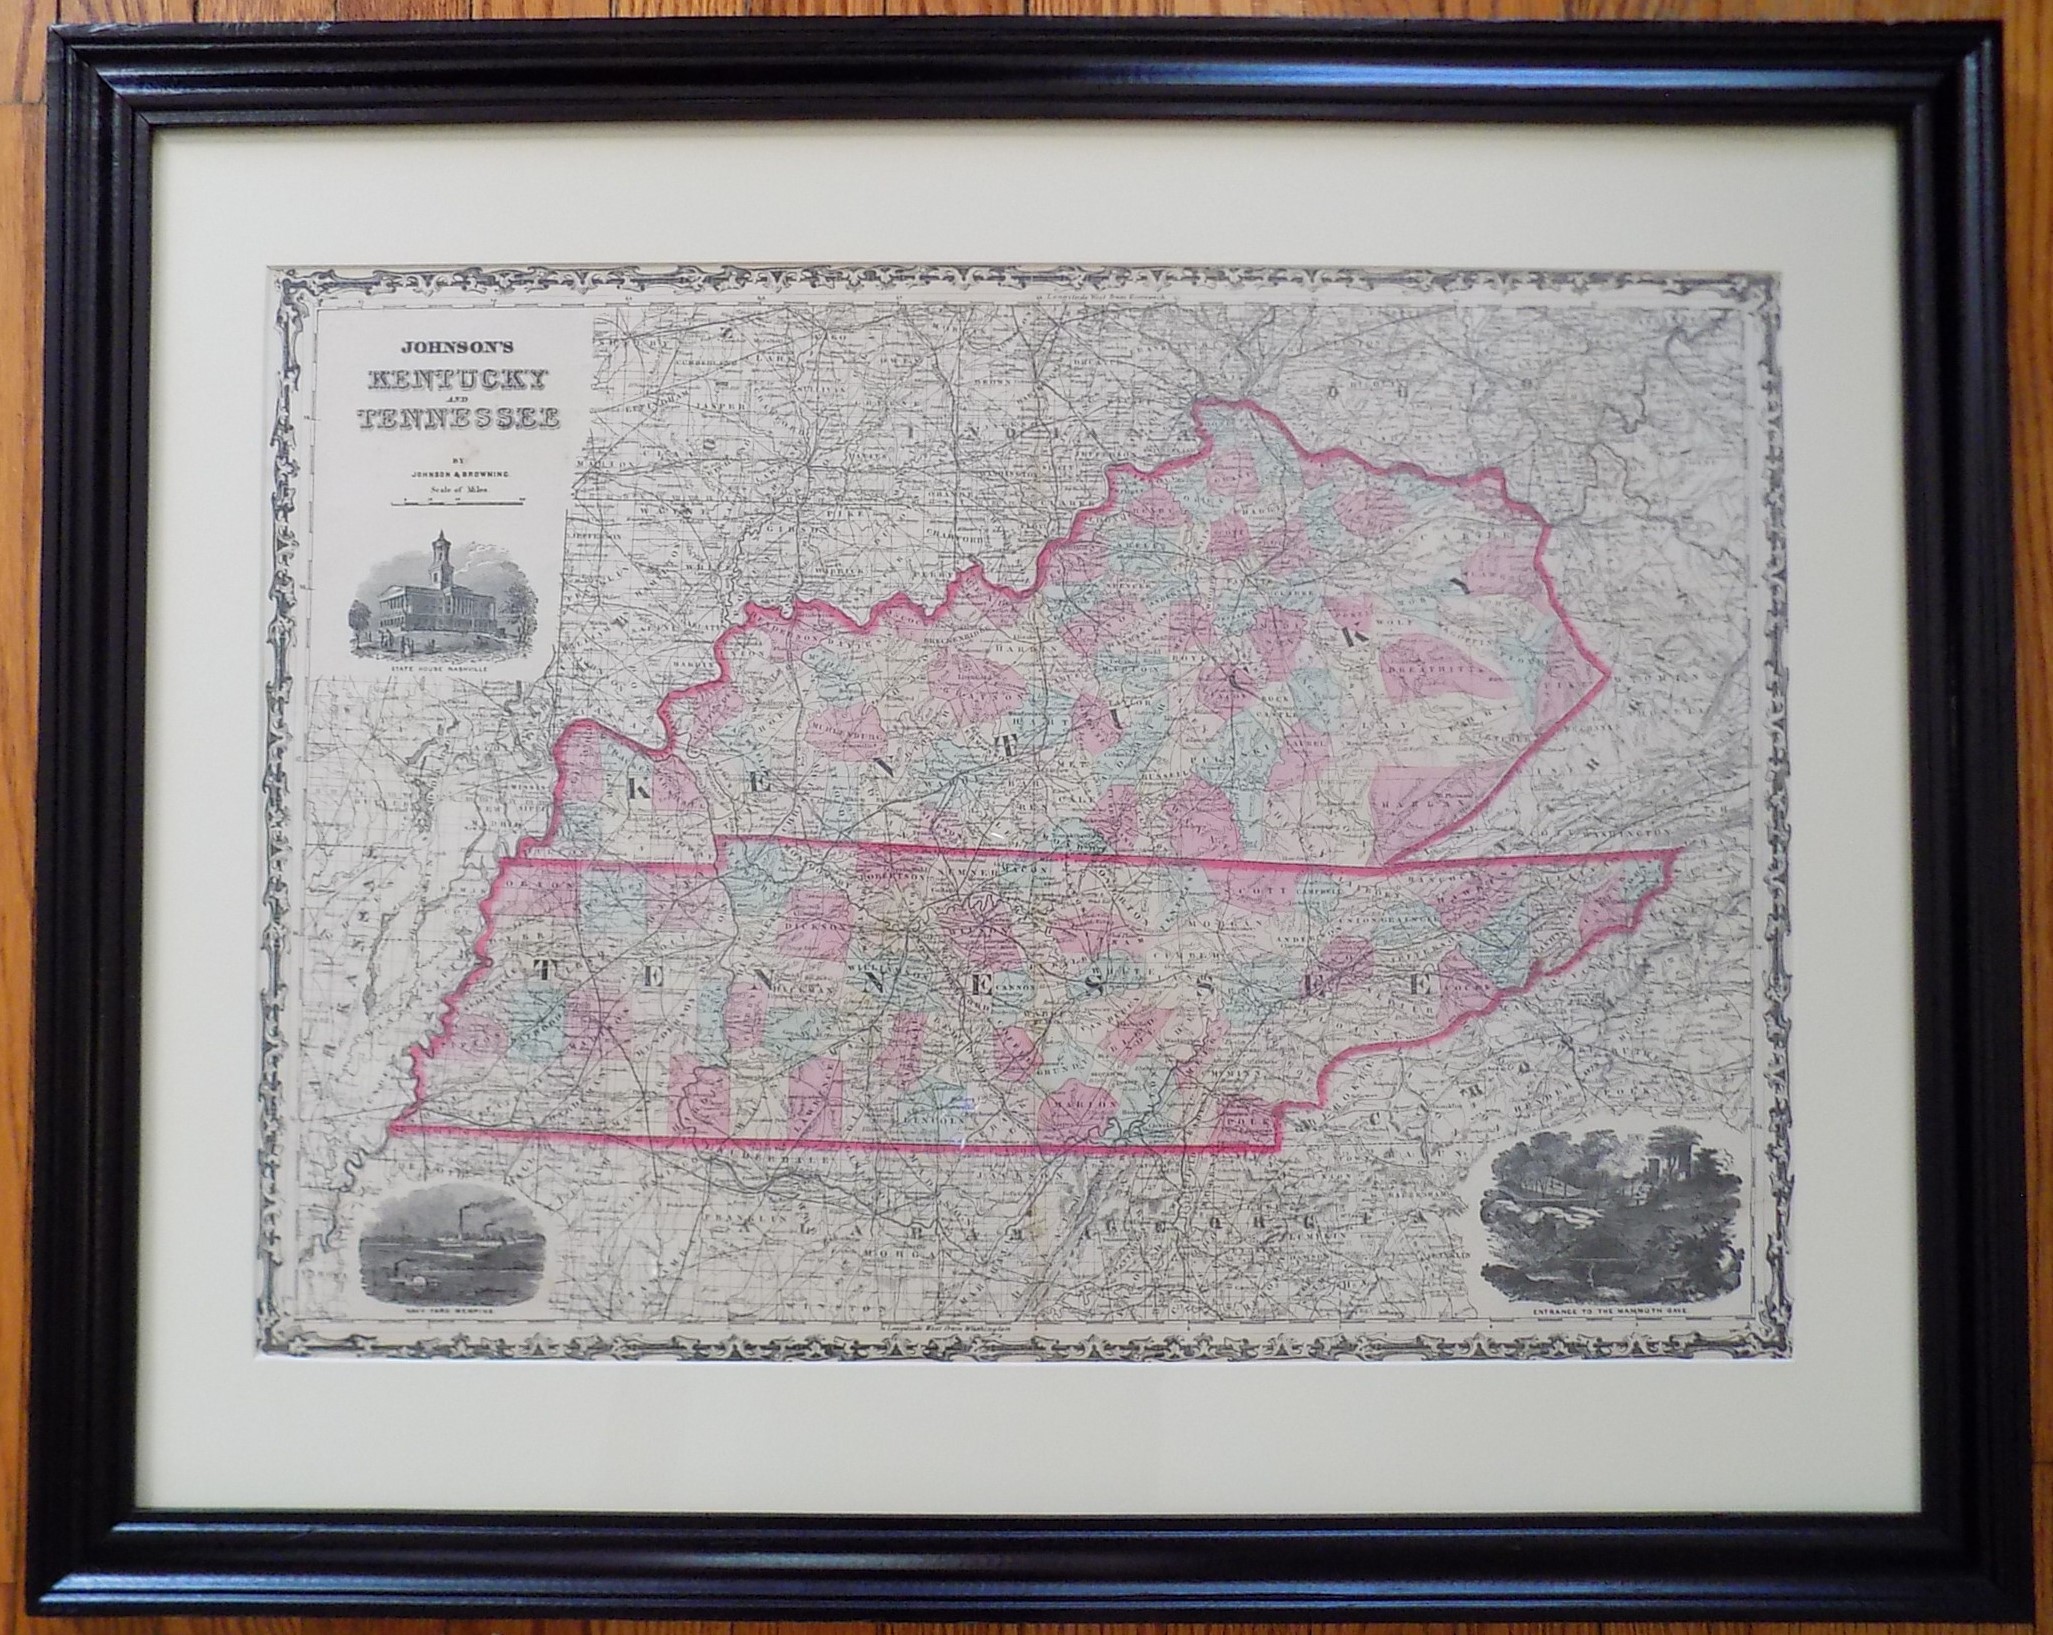 1863 Johnson map of Kentucky and Tennessee